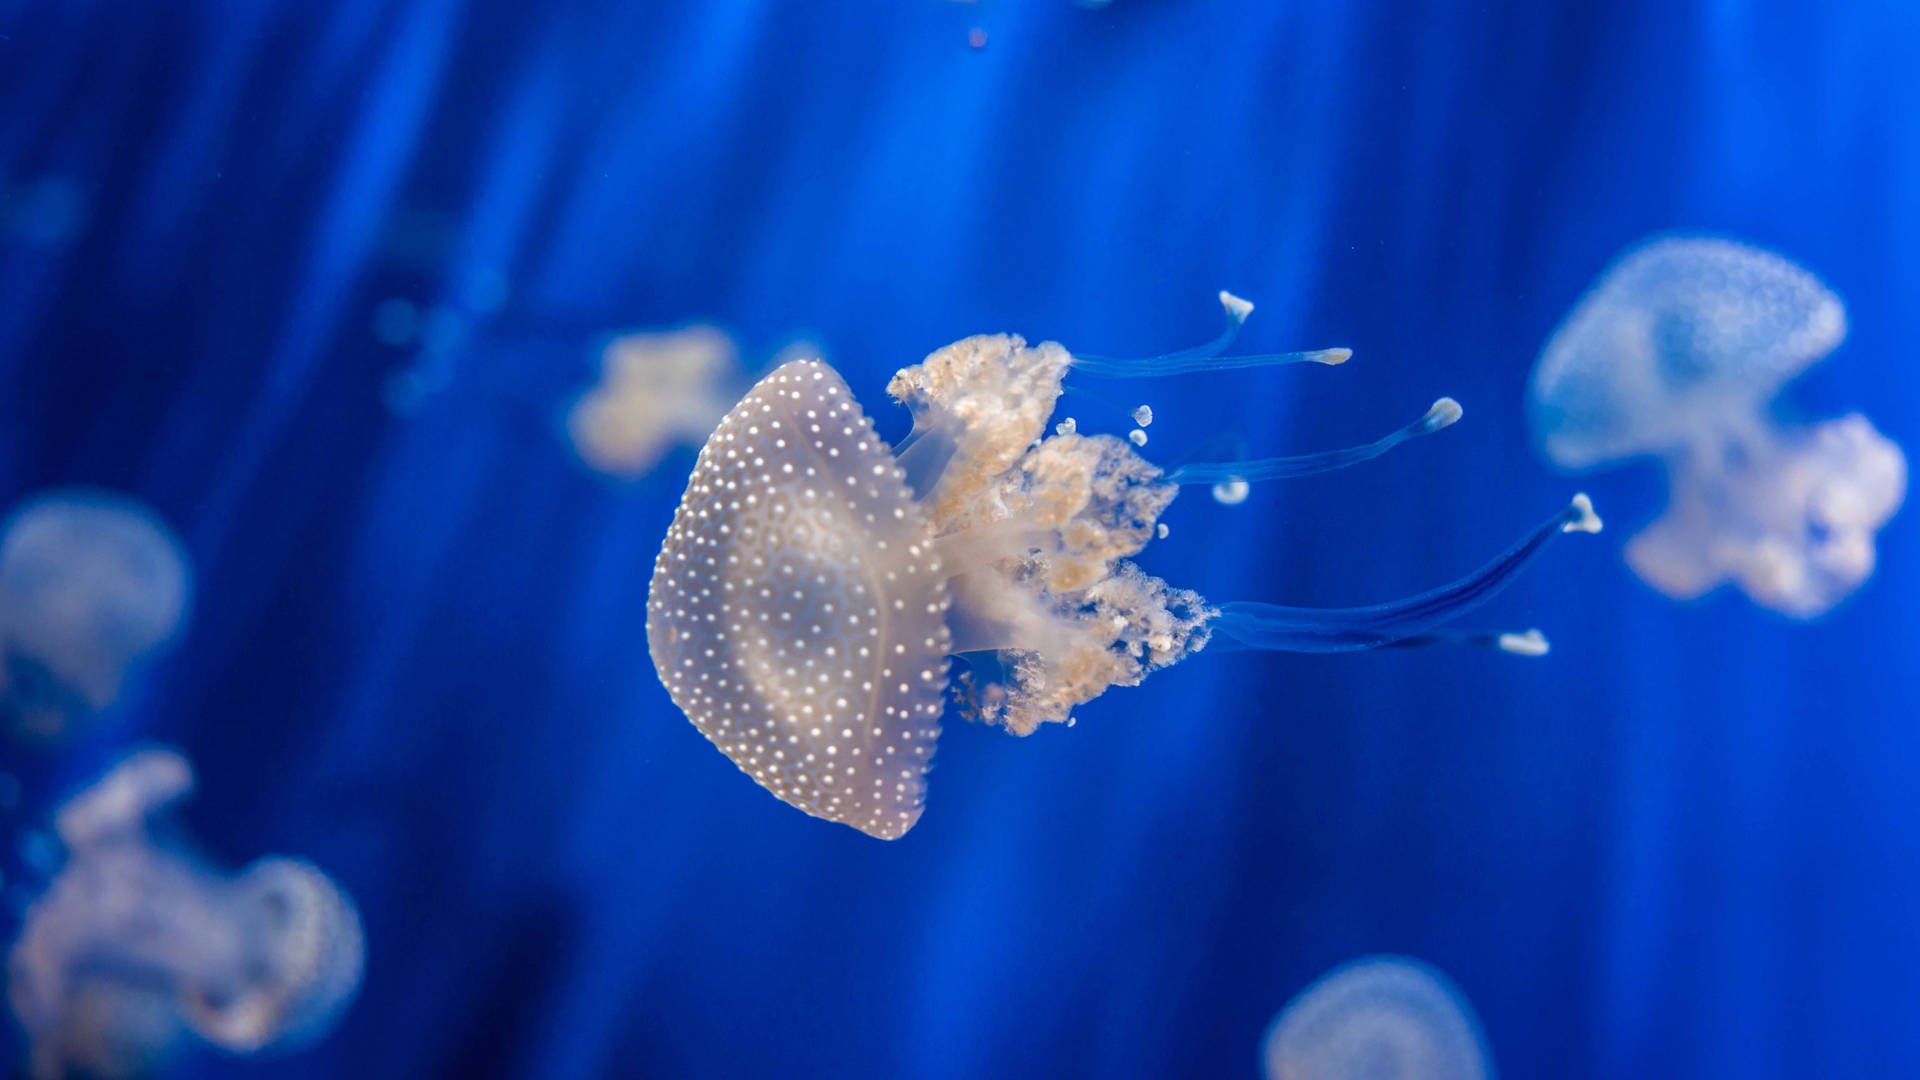 5k Hd White-spotted Jellyfish Background